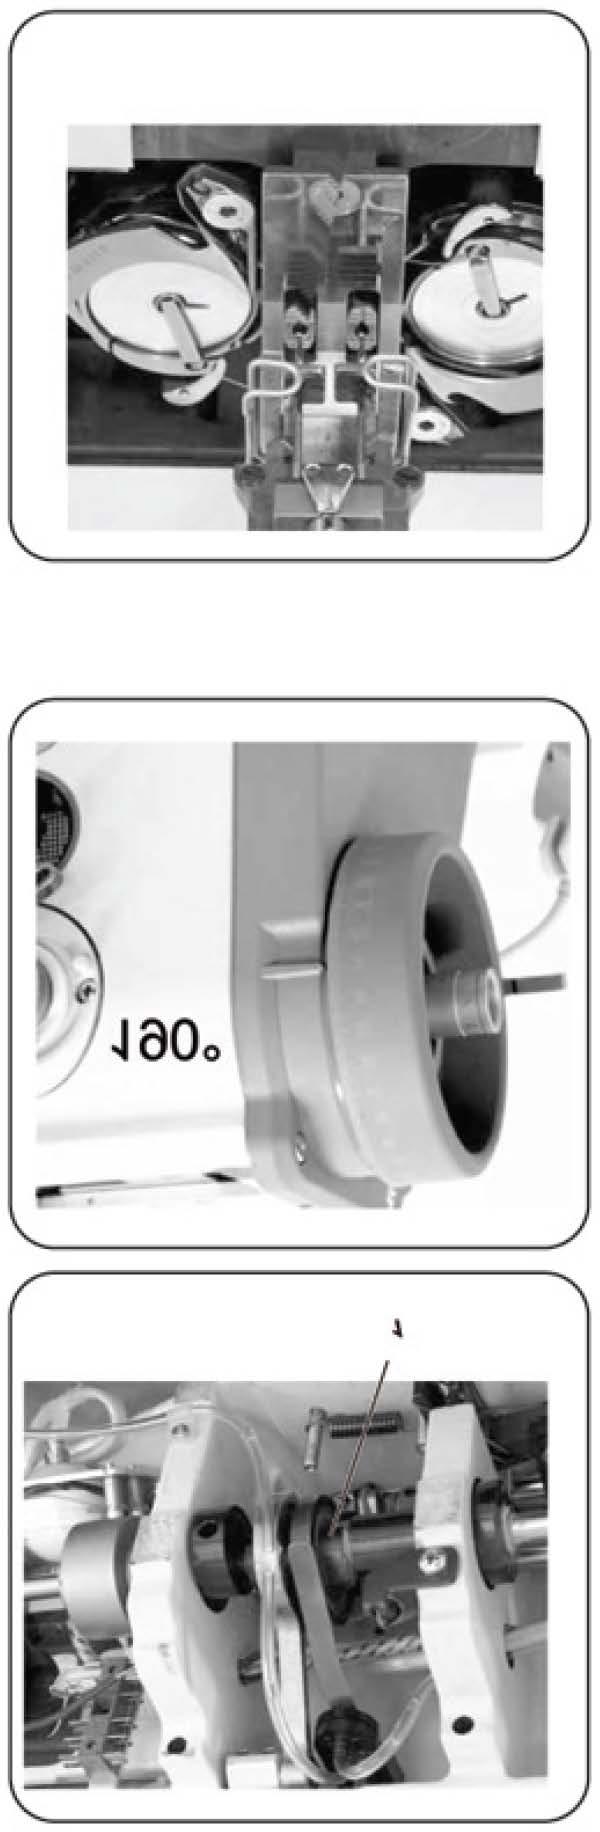 17.3 Adjustment of feed Turn the hand wheel to 190, press the hand knob of bartacking, no movement of feed shaft.